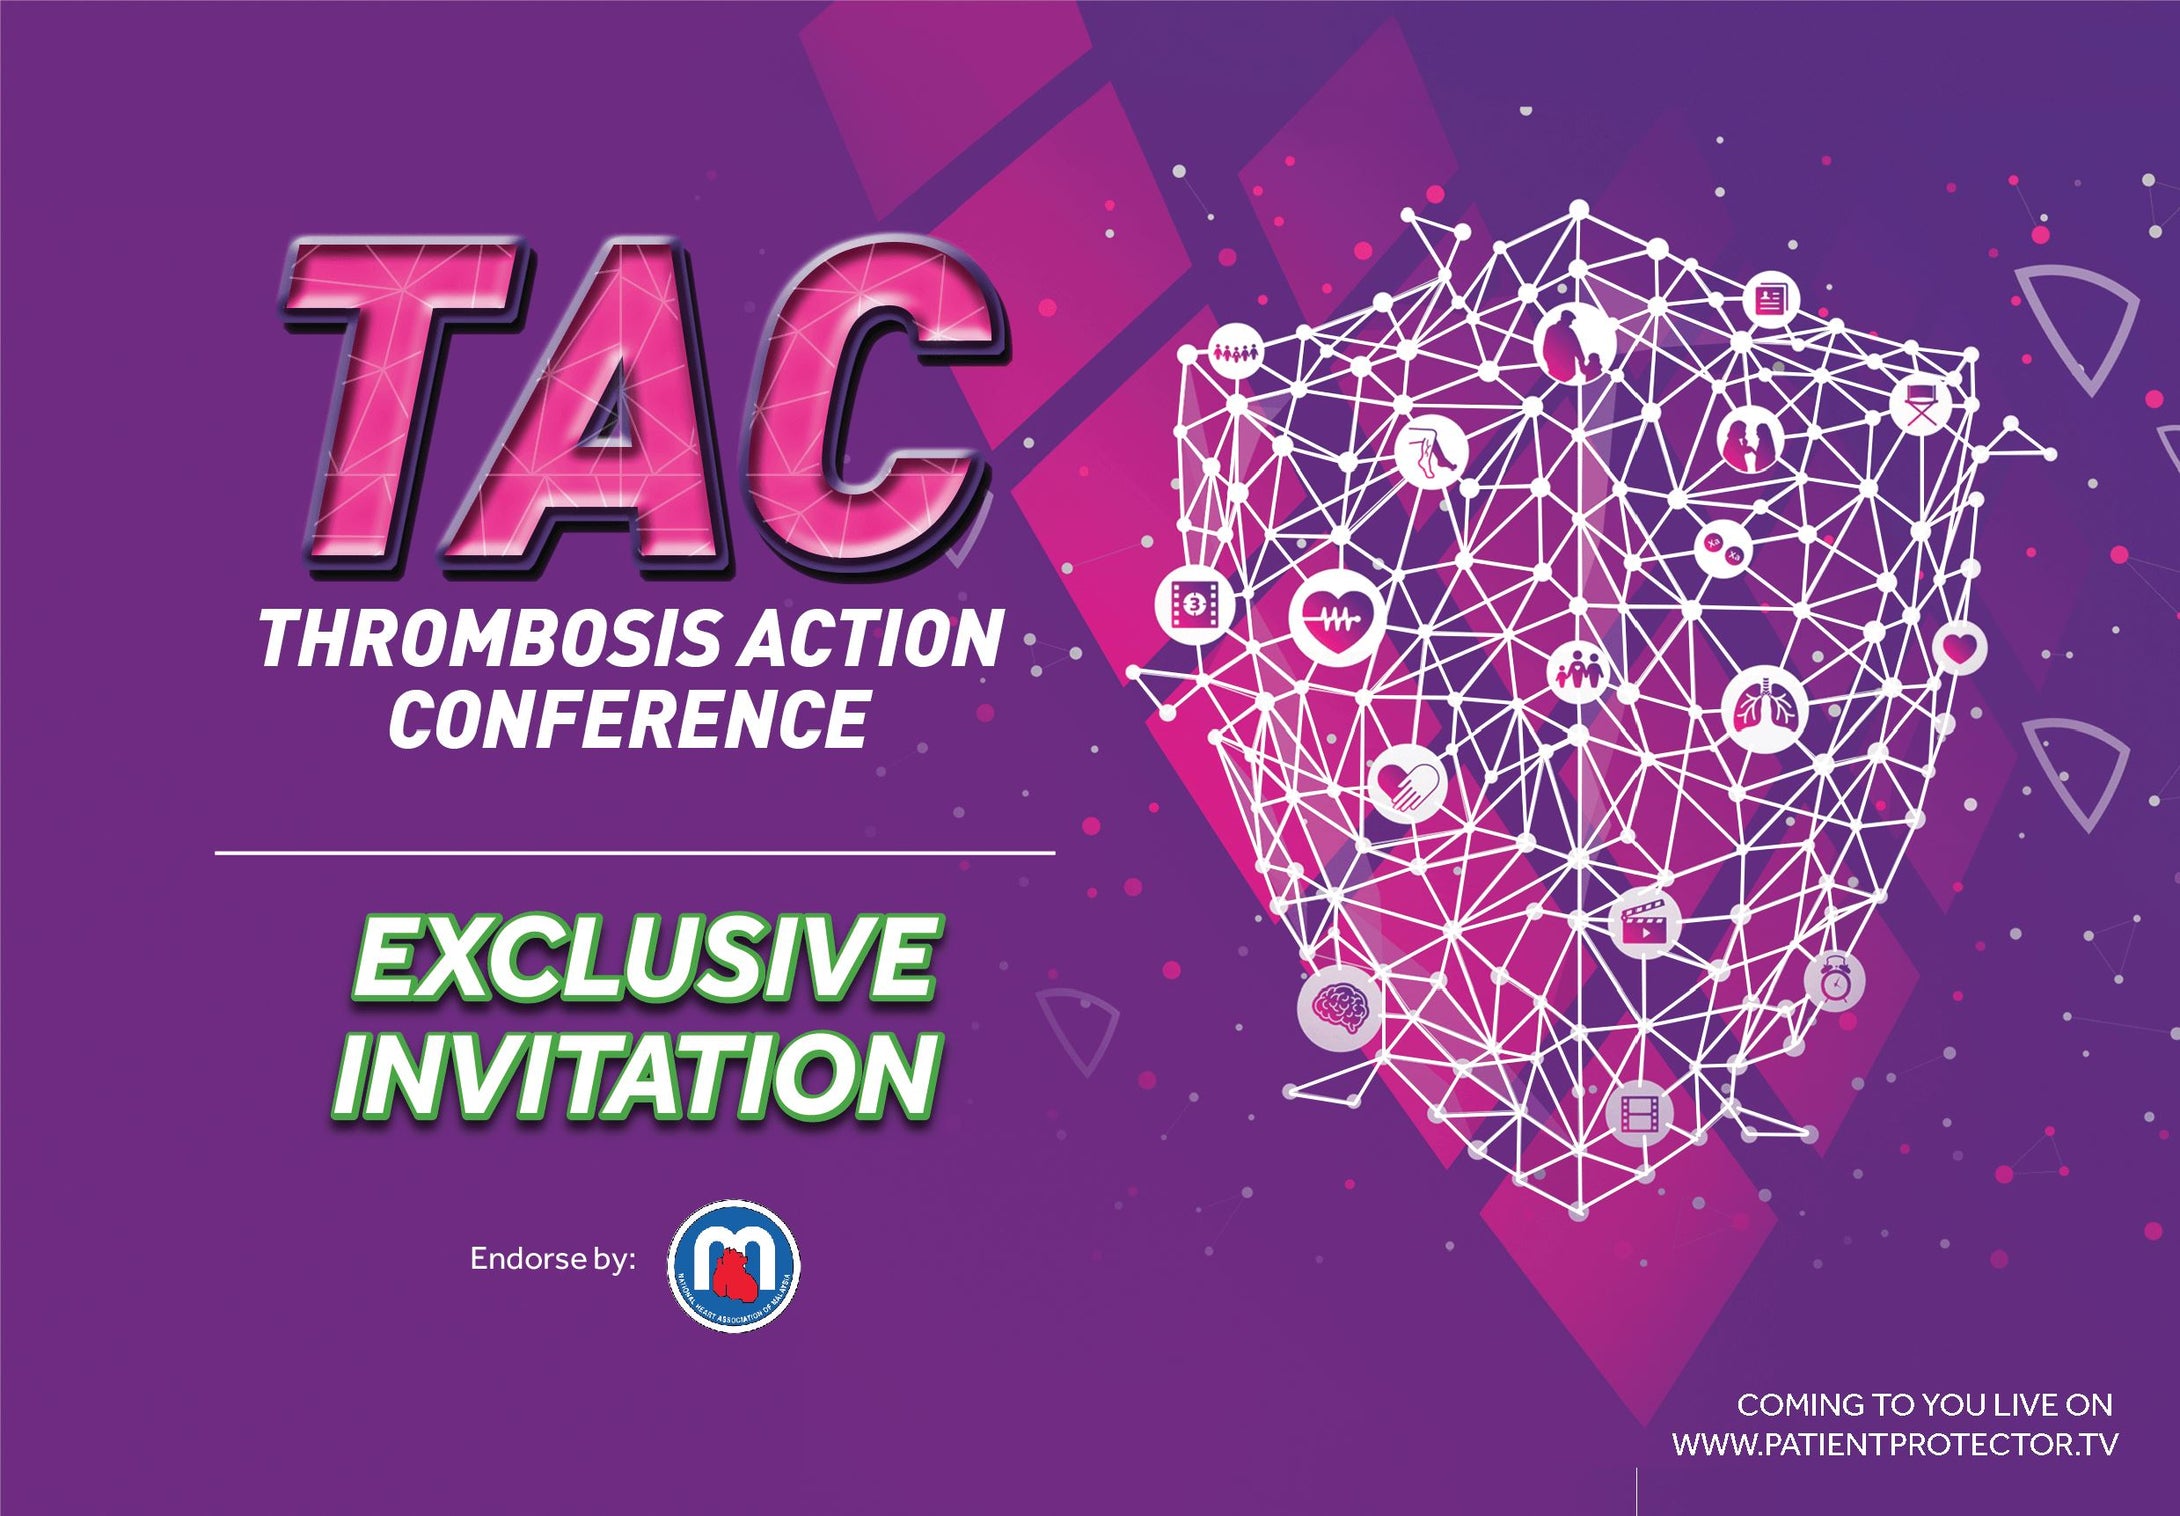 Thrombosis Action Conference (TAC) 2021 (VIDEOS) - Medical Videos | Board Review Courses